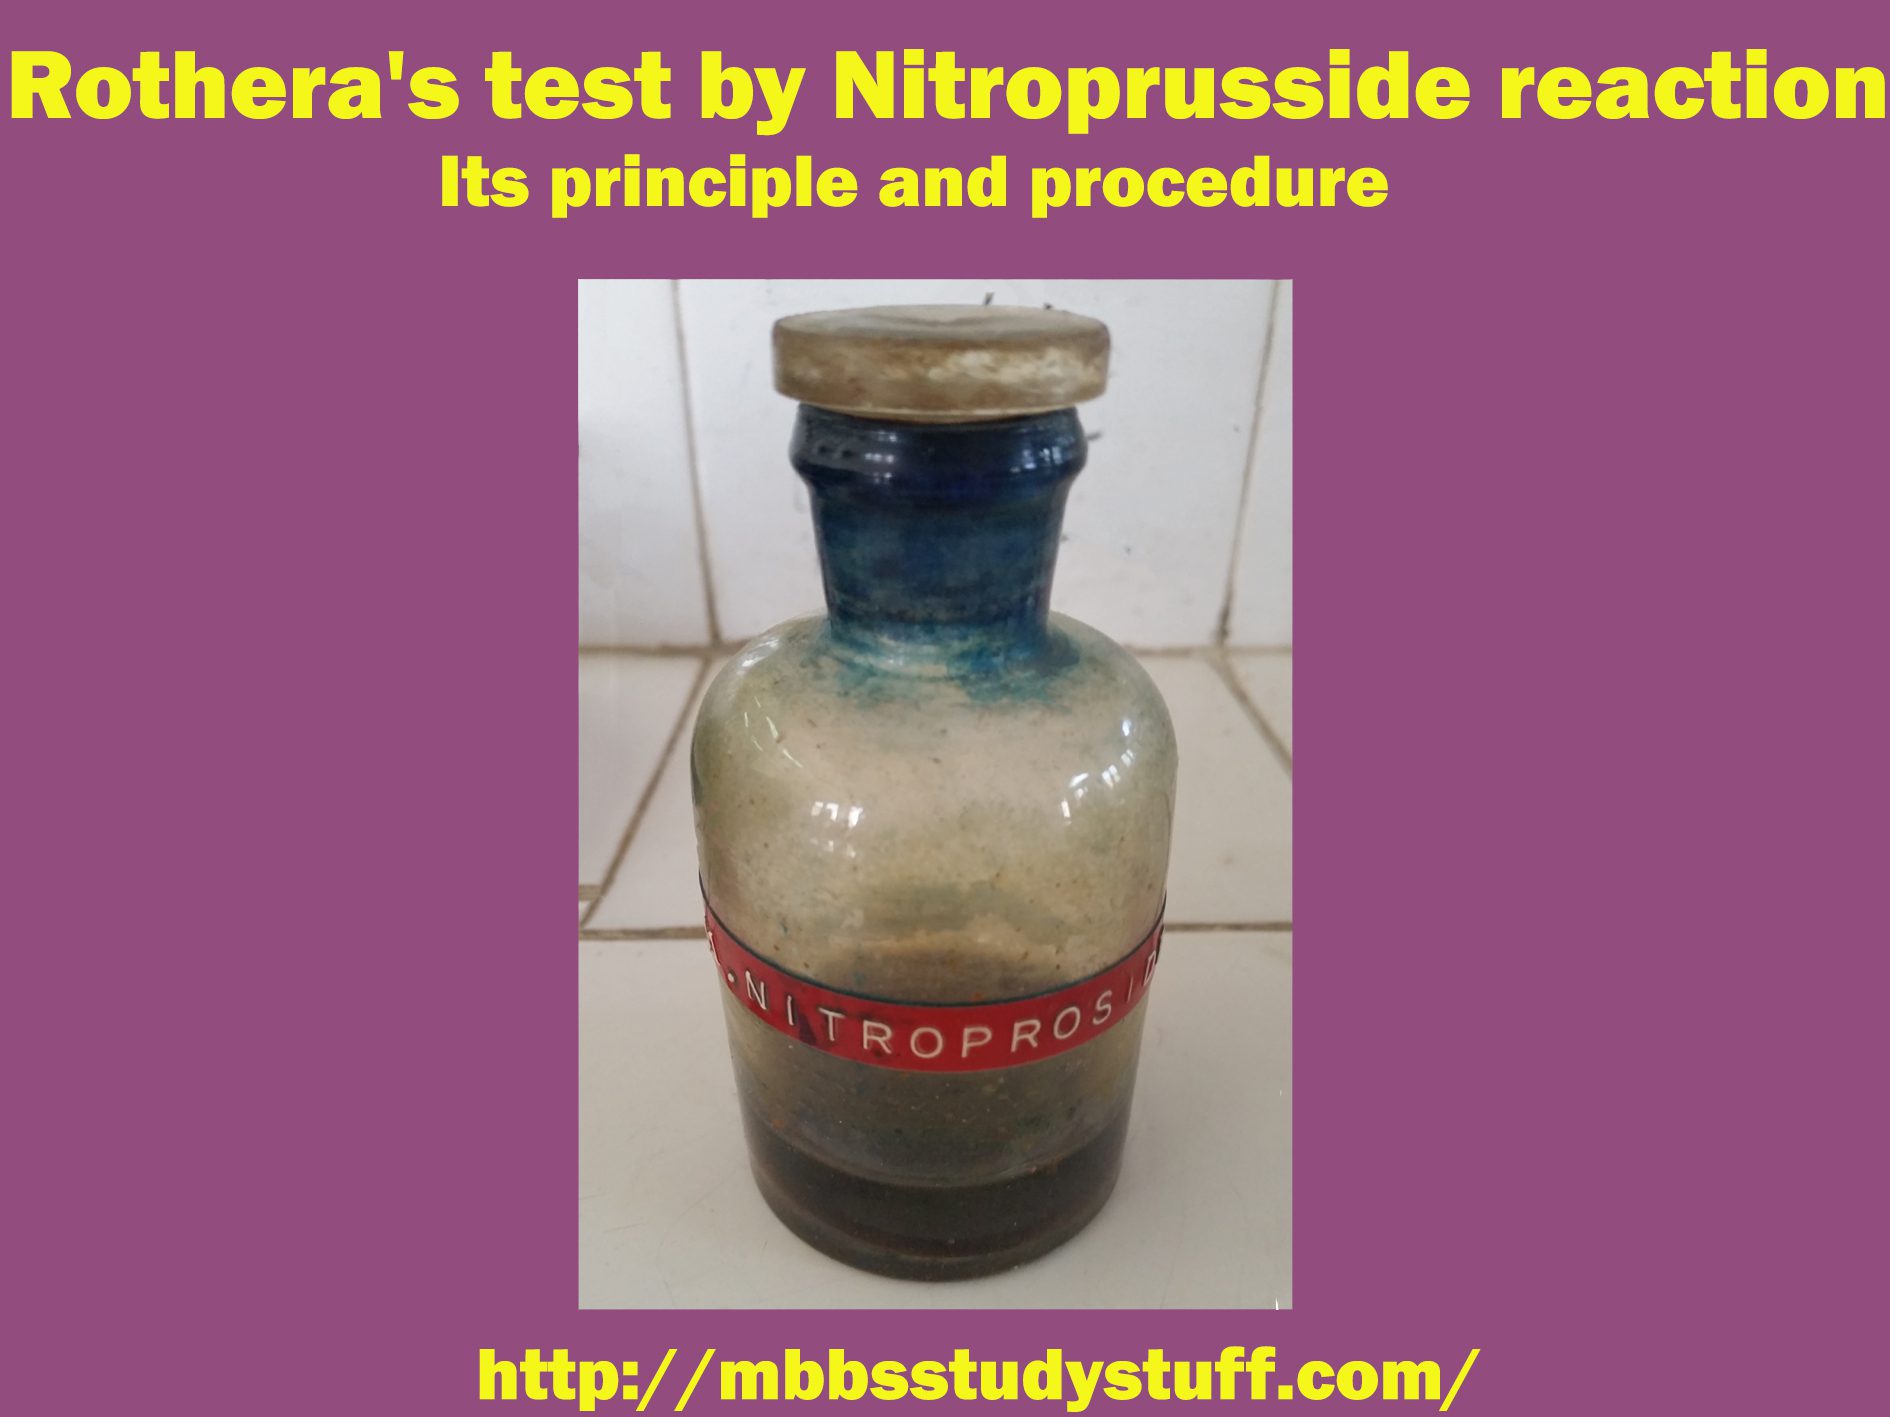 Rothera's test by Nitroprusside reaction - Its principle and procedure